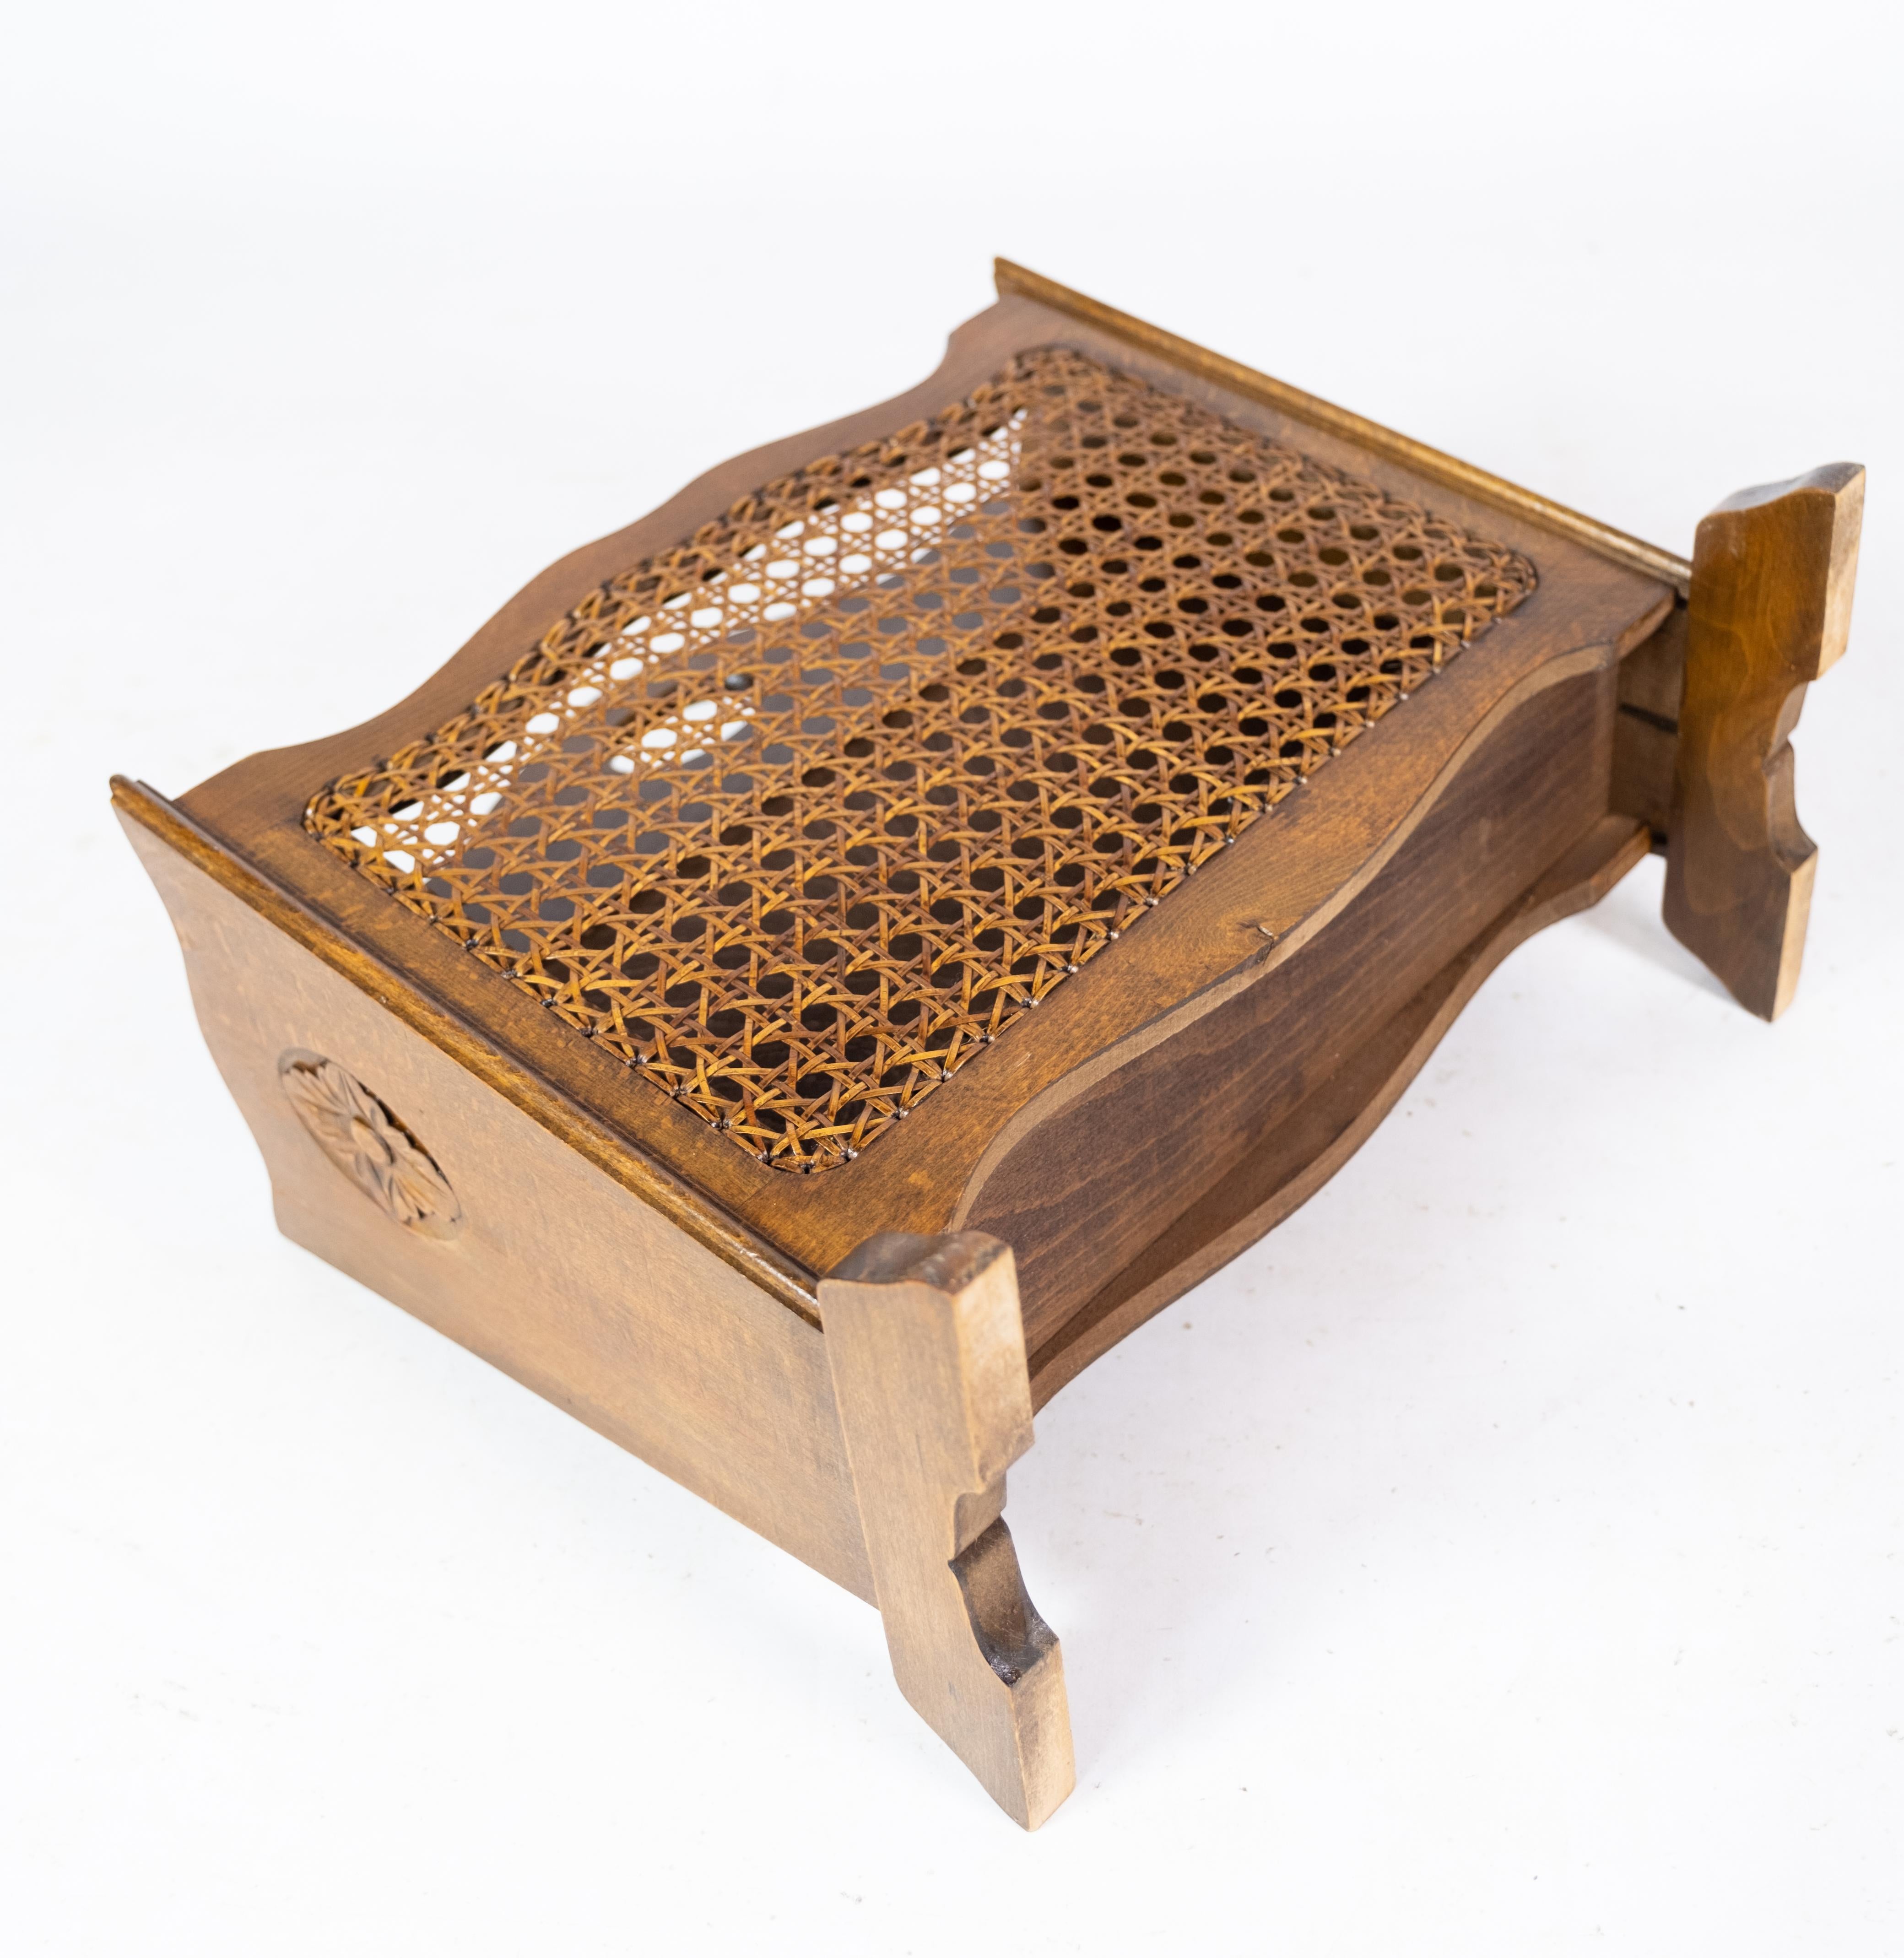 Mid-20th Century Newspaper Holder, Polished Wood, French Wicker, 1940